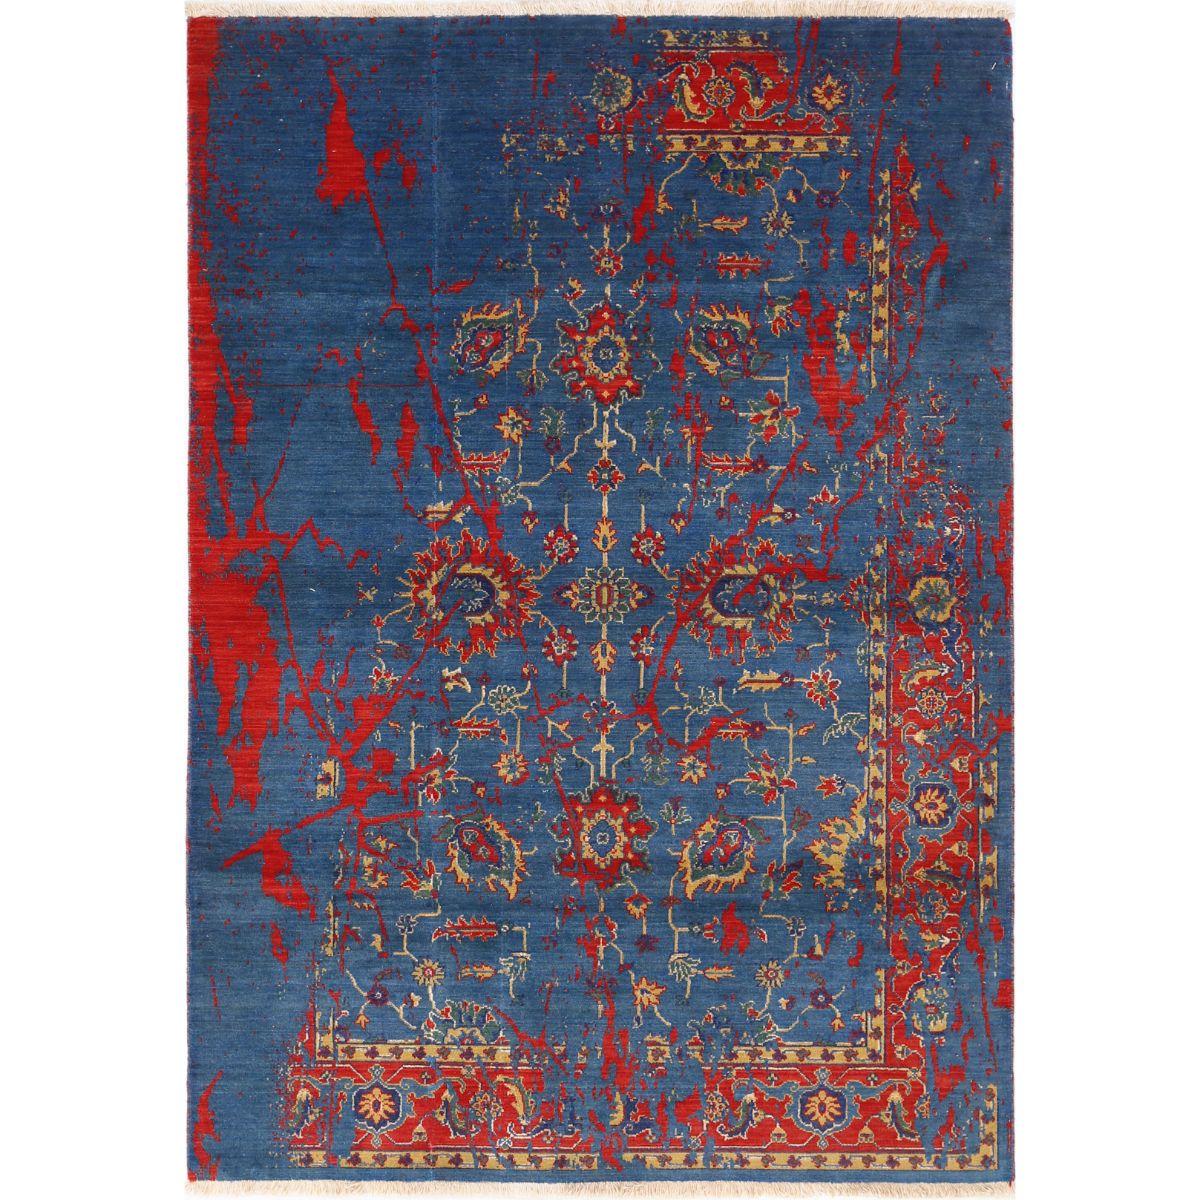 Gulshan Collection Powered Loomed Blue 4'0" X 5'10" Rectangle Gulshan Design Wool Rug